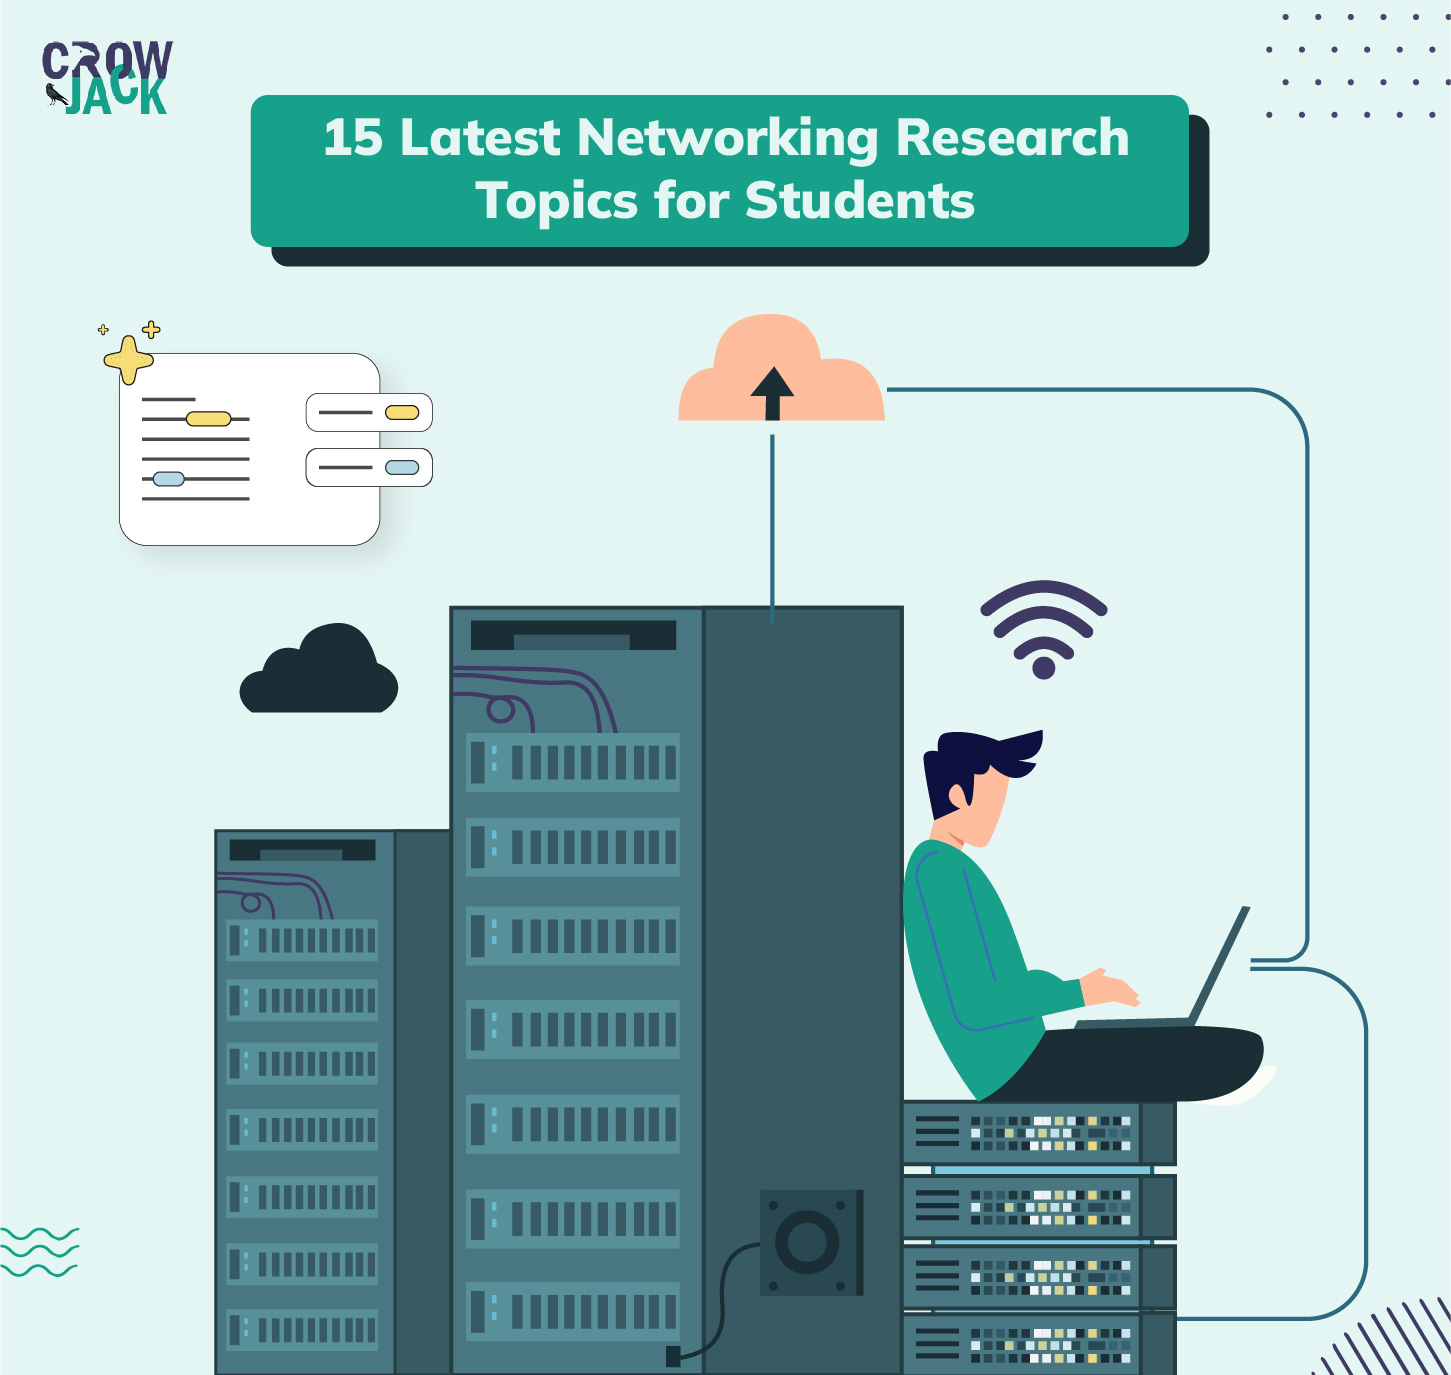 15 Latest Networking Research Topics for Students - Featured Image